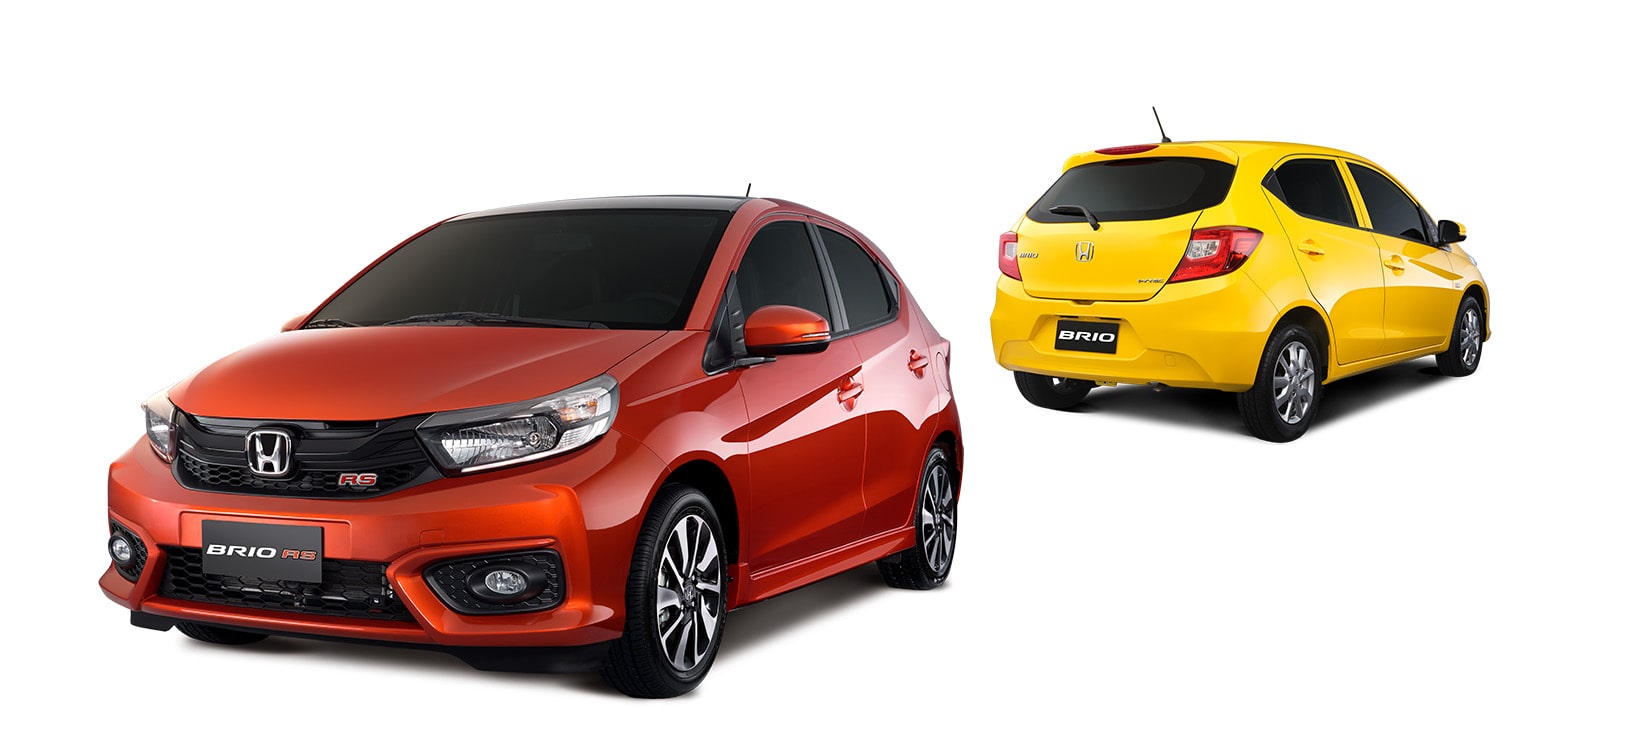 The All-New 2019 Honda Brio is now available in the Philippines!